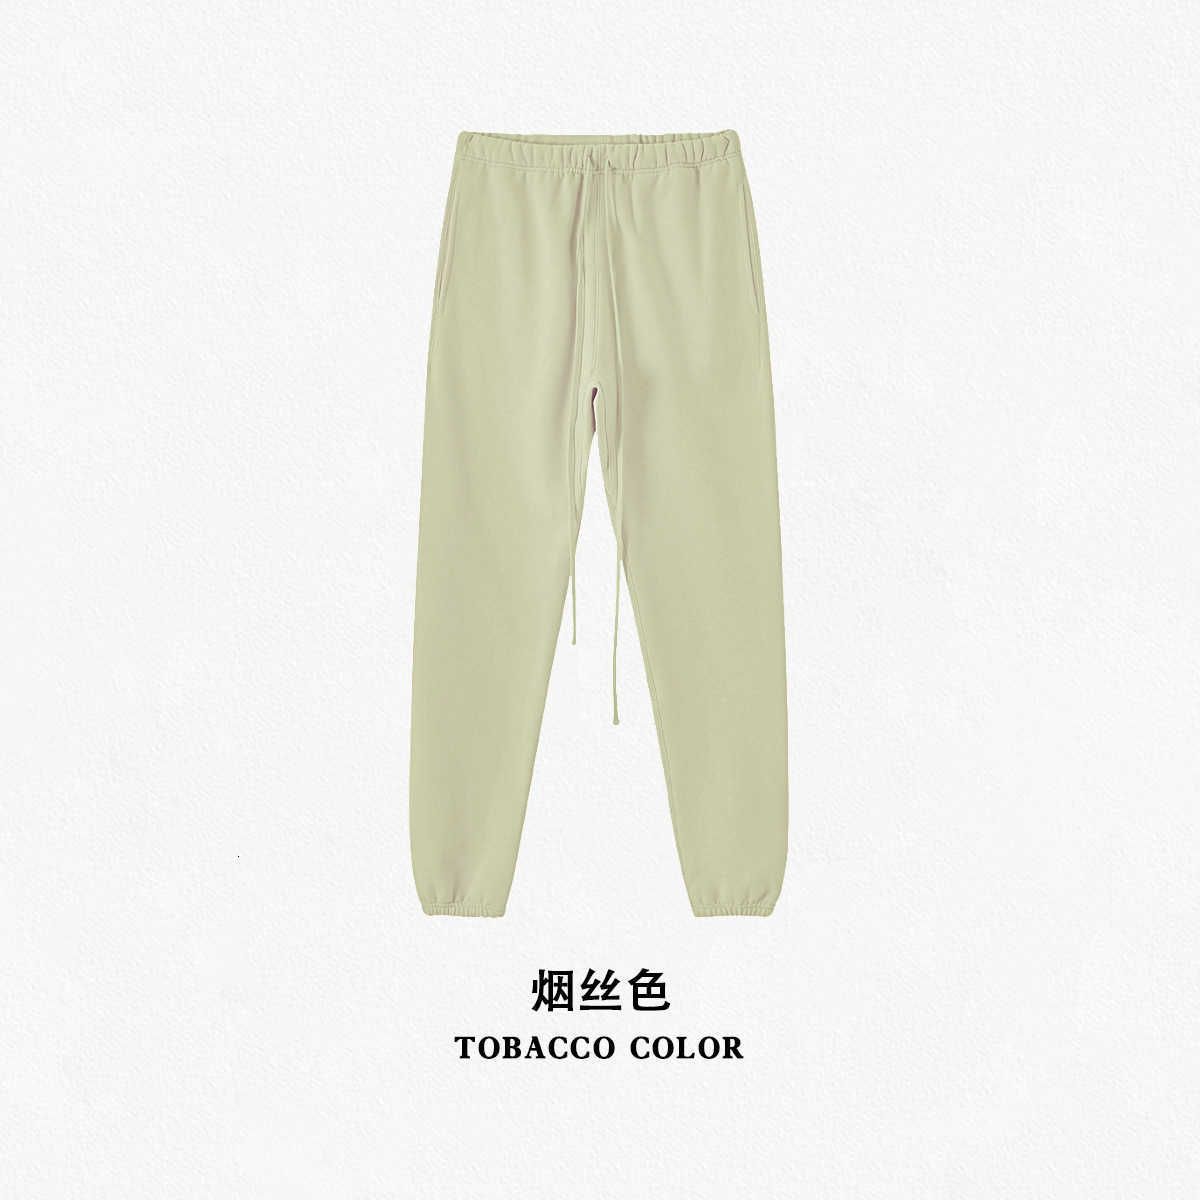 Tobacco Colored Pants